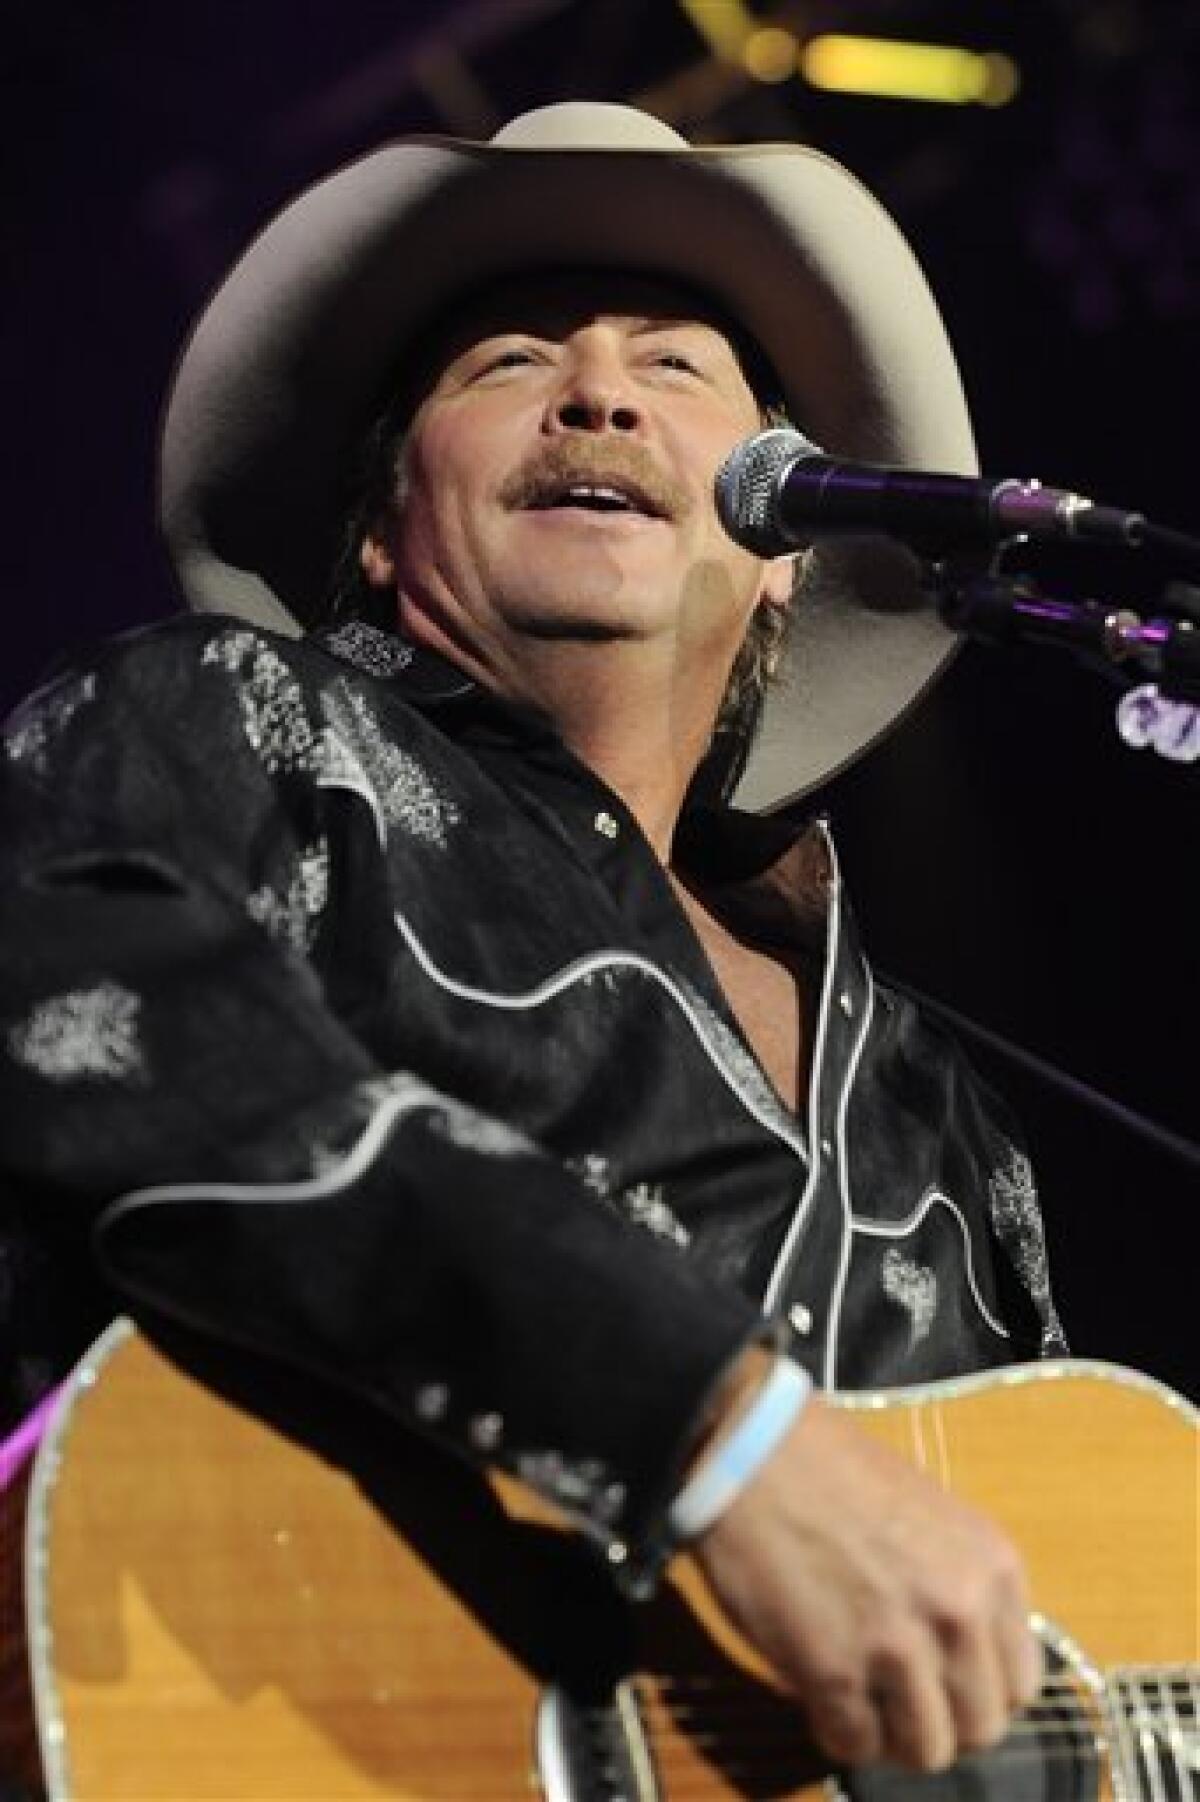 FILE - In this May 22, 2010 file photo, country singer Alan Jackson performs during a benefit show for the victims of the Upper Big Branch coal mine explosion at the Charleston Civic Center in Charleston, W.Va. (AP Photo/Jeff Gentner, file)